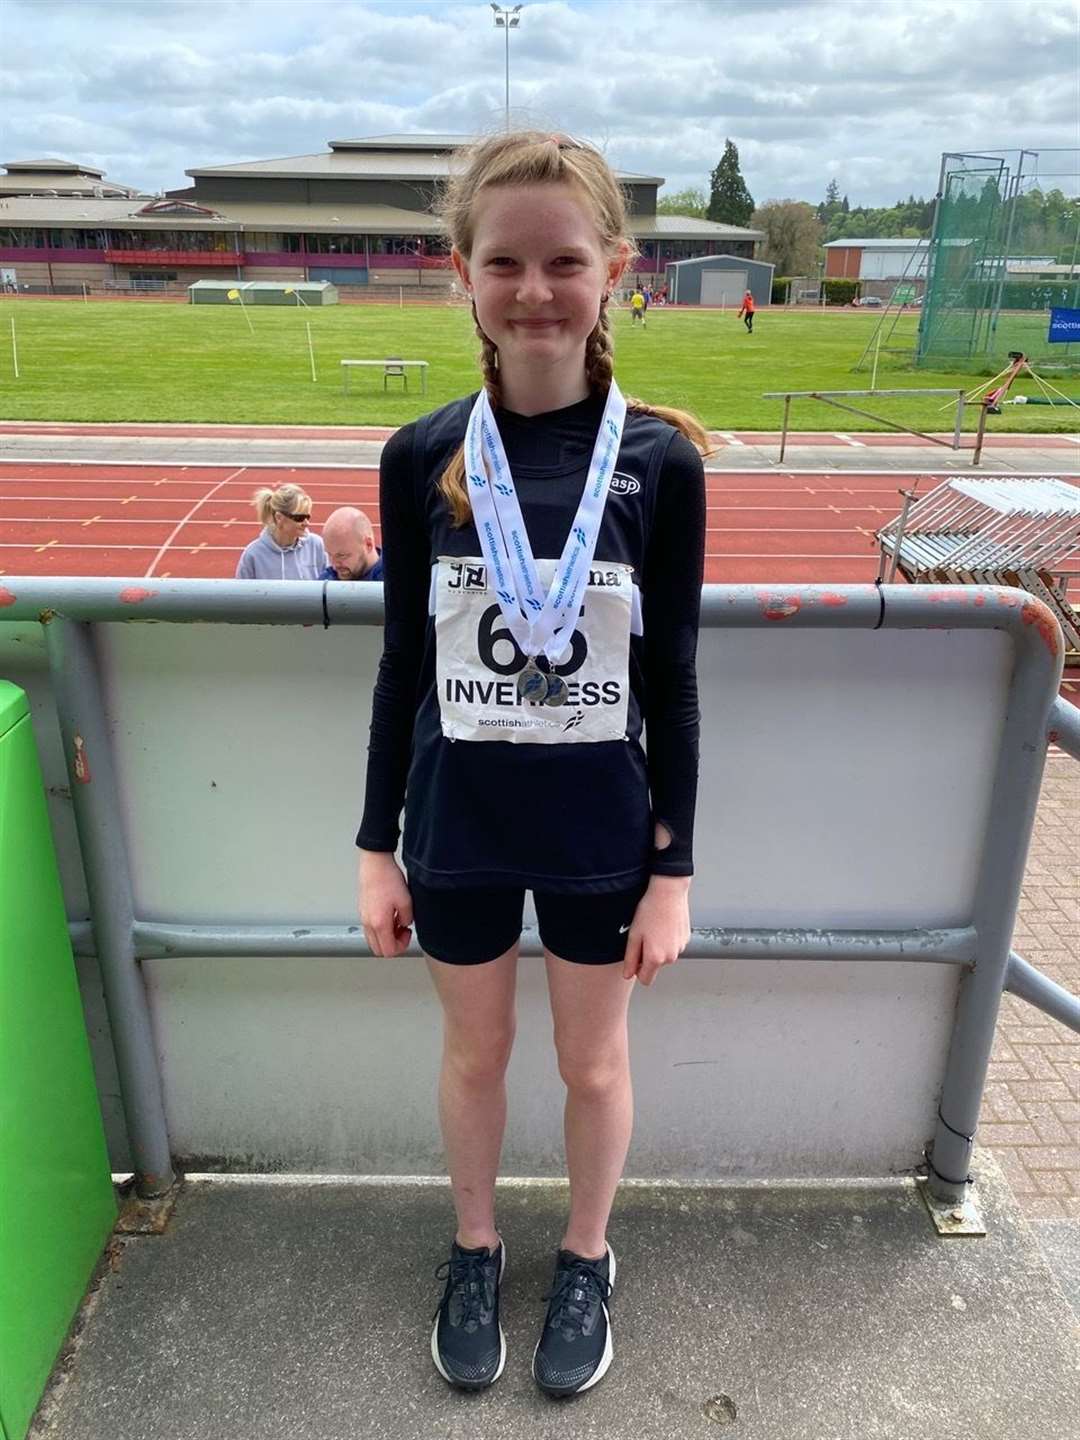 Eilidh Neillie-Rutherford pictured at the track in Inverness.